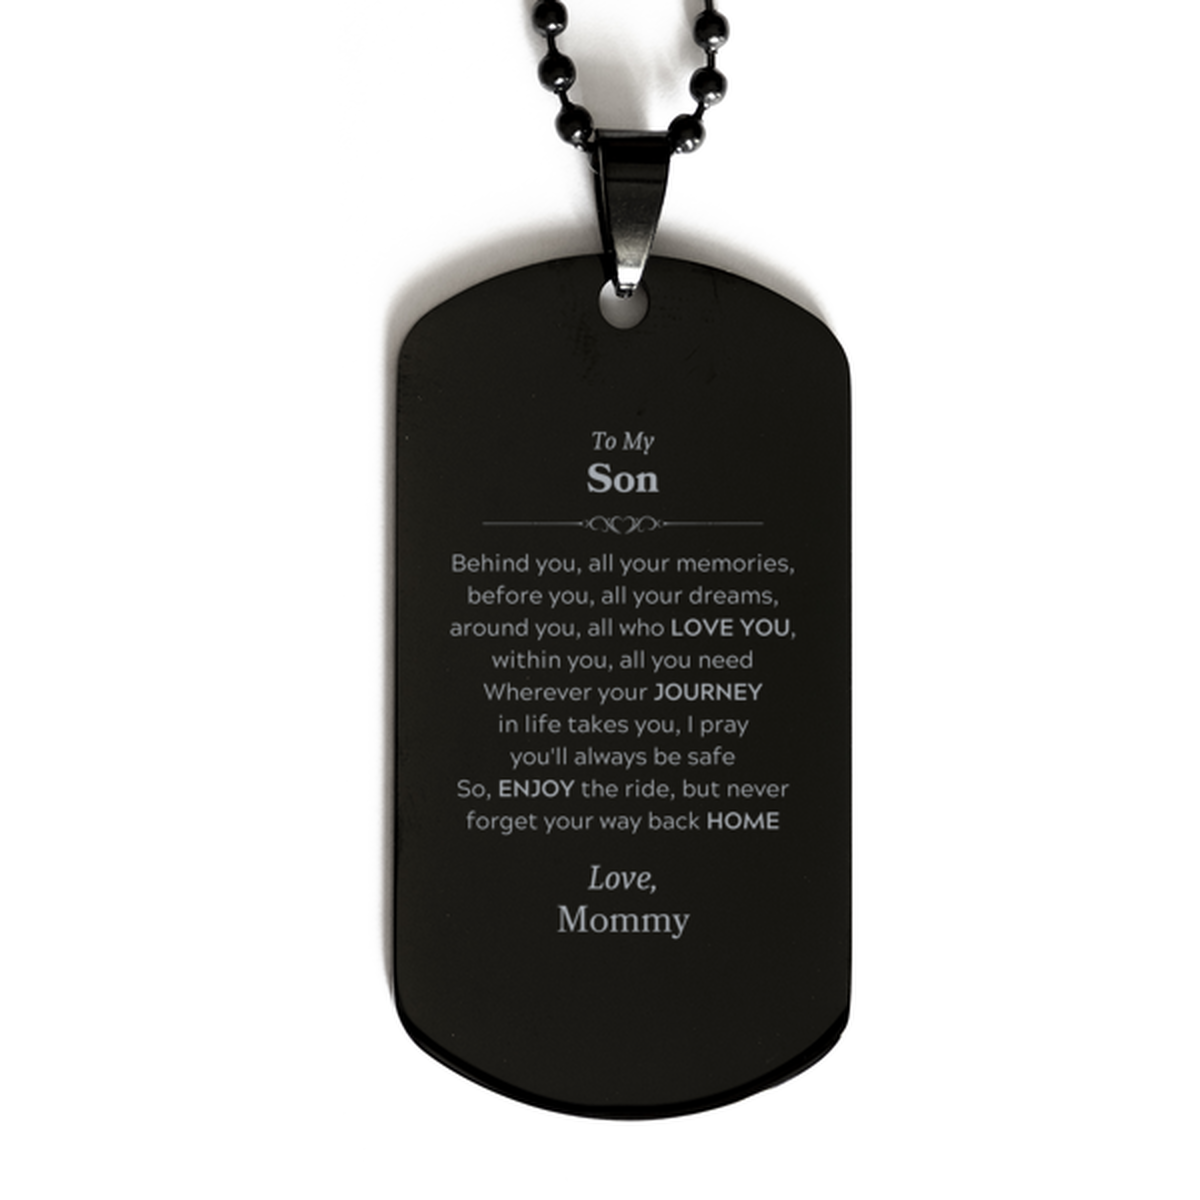 To My Son Graduation Gifts from Mommy, Son Black Dog Tag Christmas Birthday Gifts for Son Behind you, all your memories, before you, all your dreams. Love, Mommy